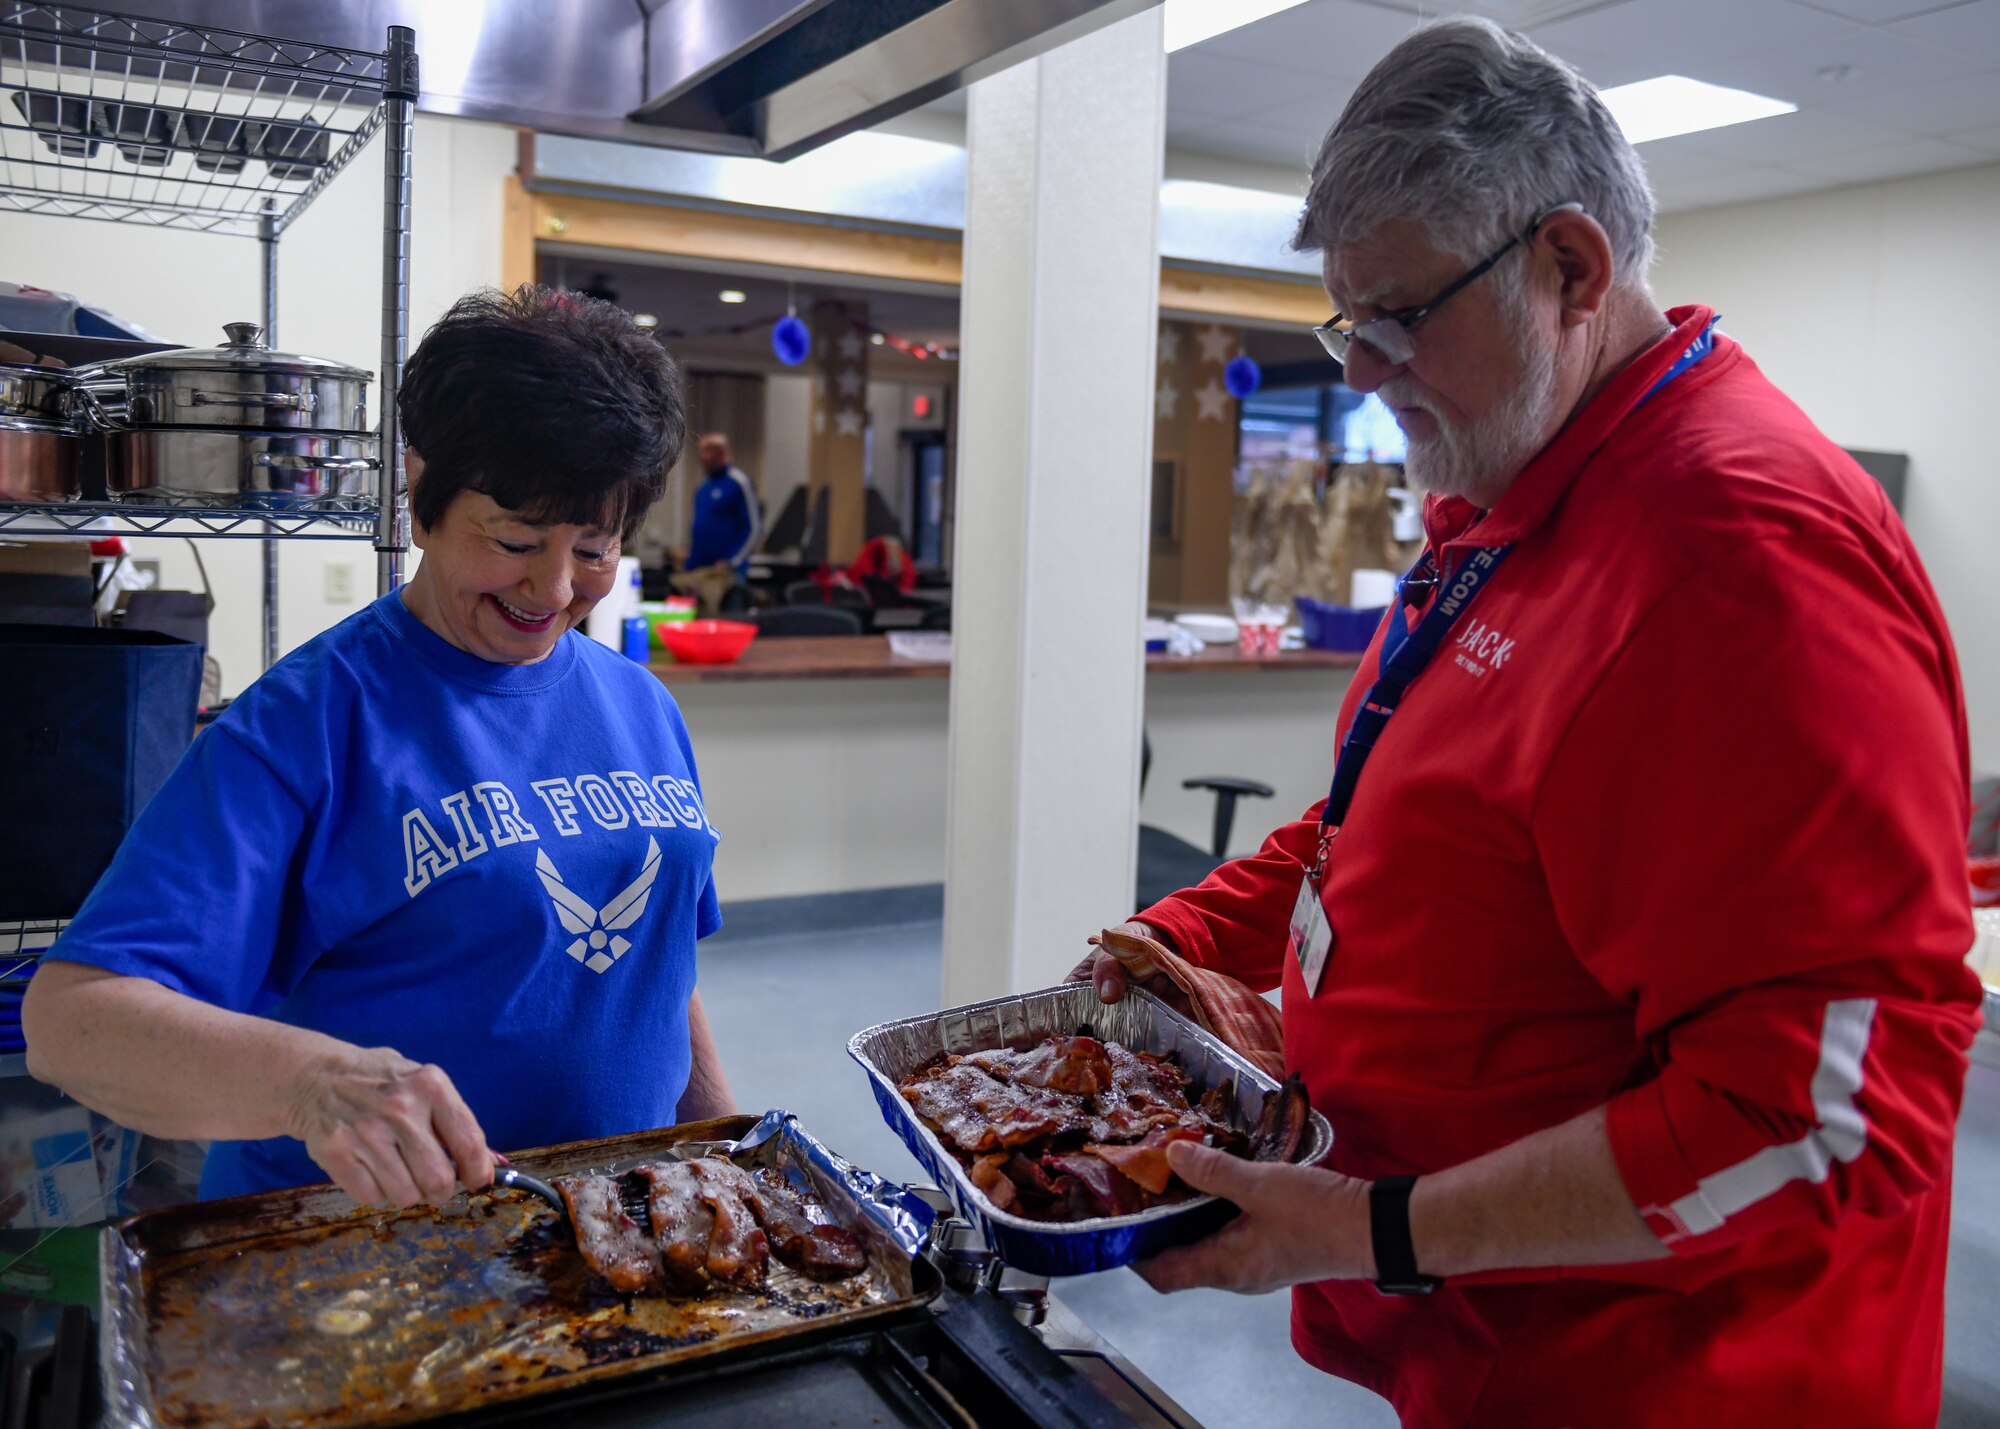 Military and Family Readiness volunteers make breakfast for Airmen, Feb. 3, 2023, at Youngstown Air Reserve Station, Ohio.